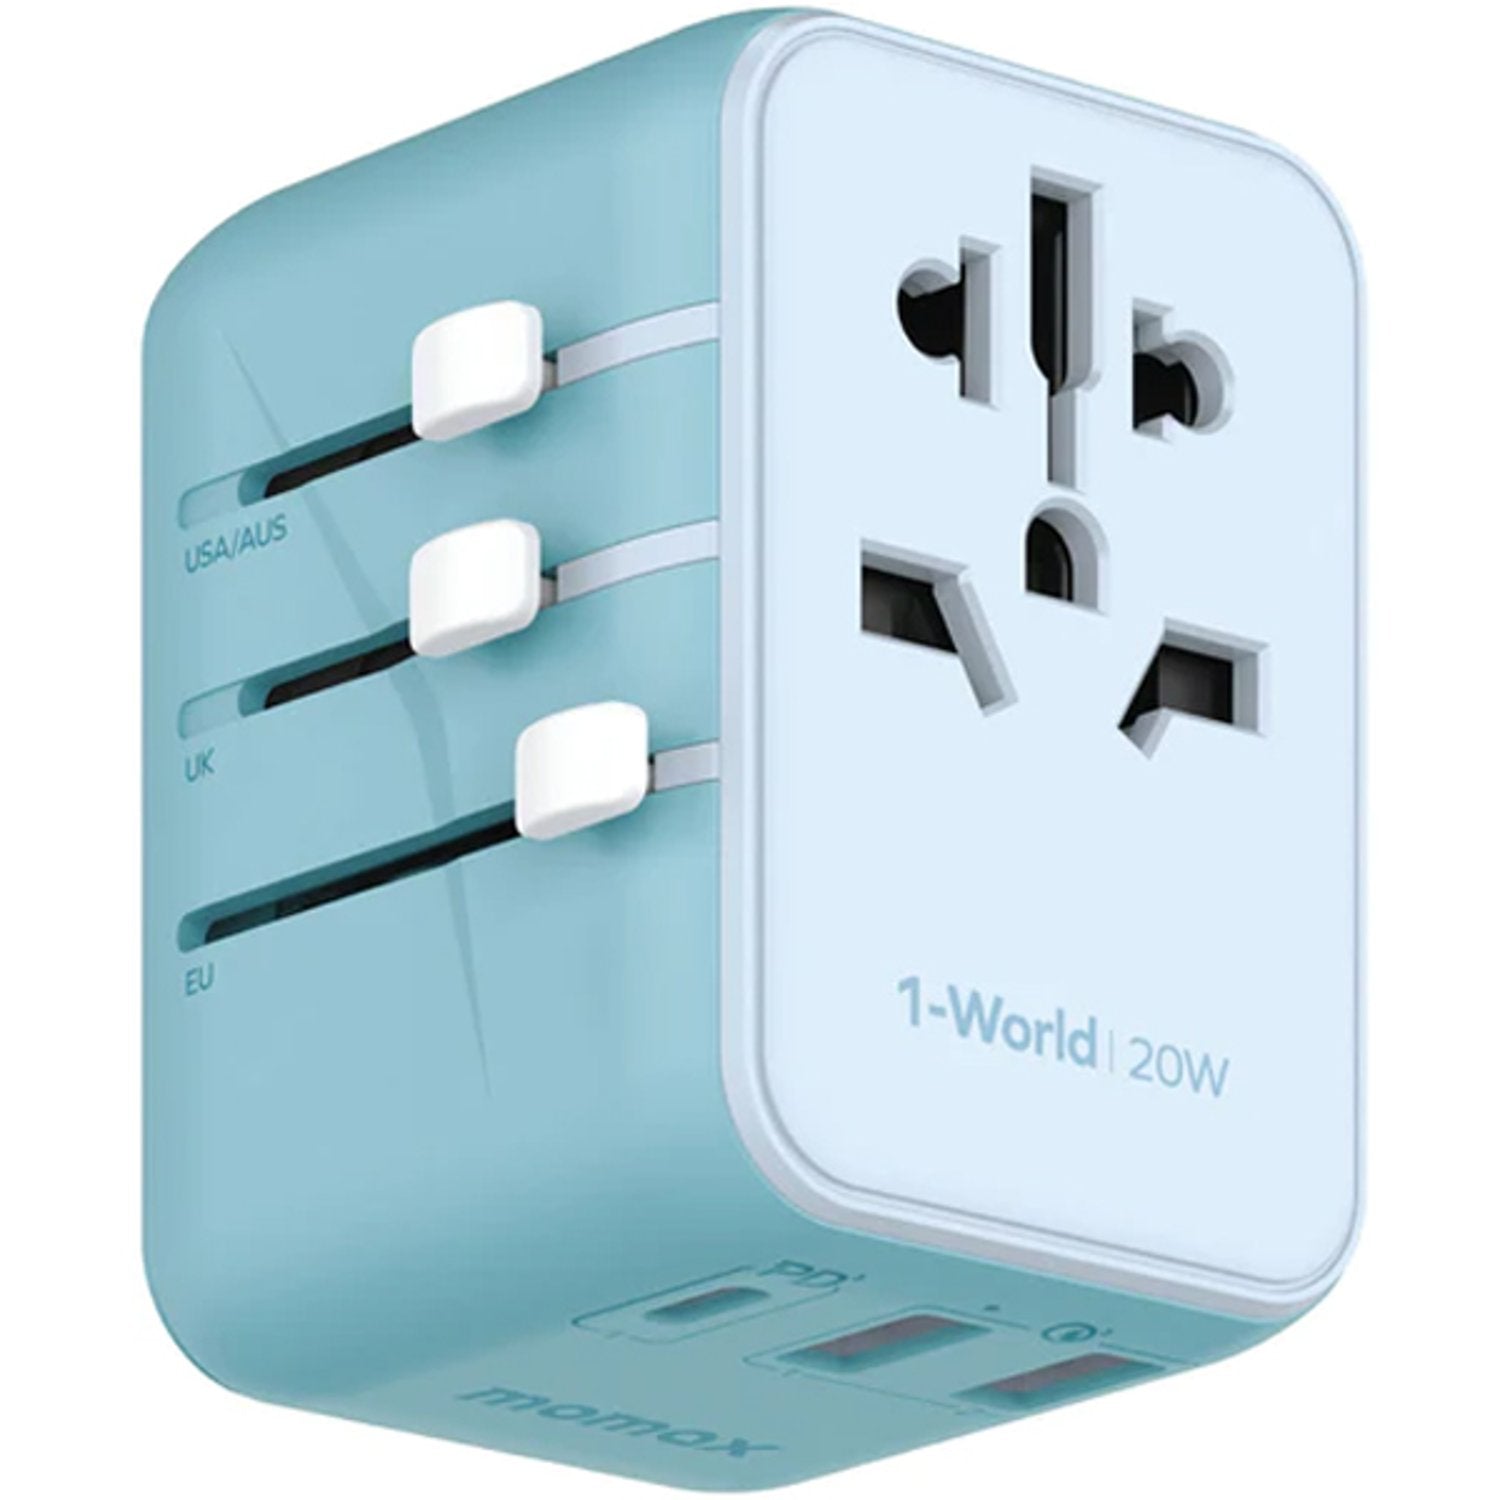 Momax 1-World 20W 3 Ports AC Travel Adapter - Blue | UA11B, 32965709824252, Available at 961Souq